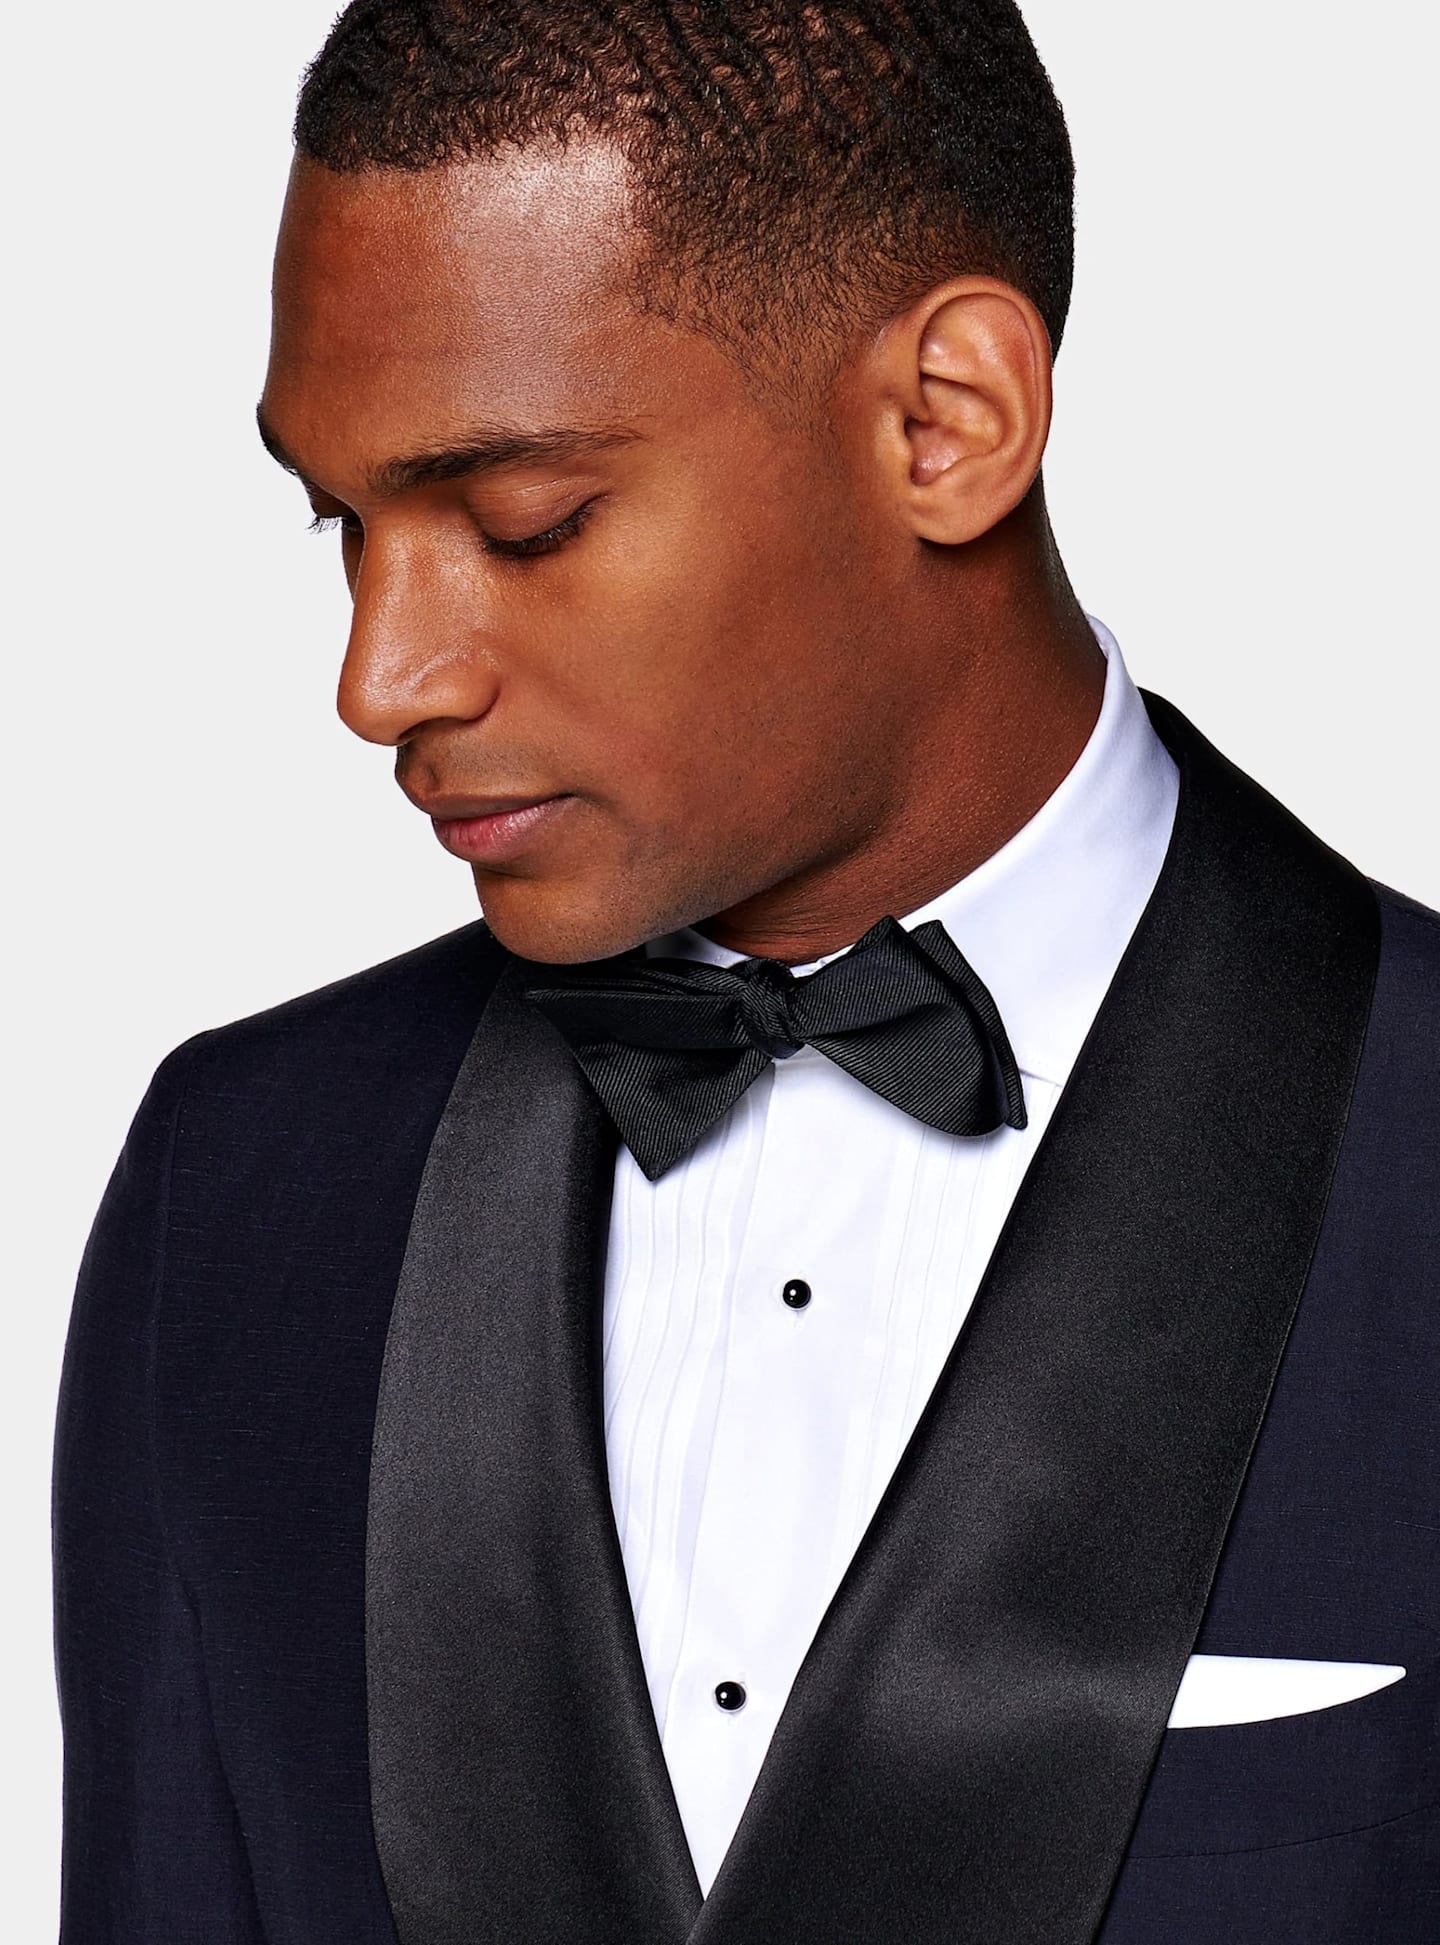 What bow tie for your tuxedo?